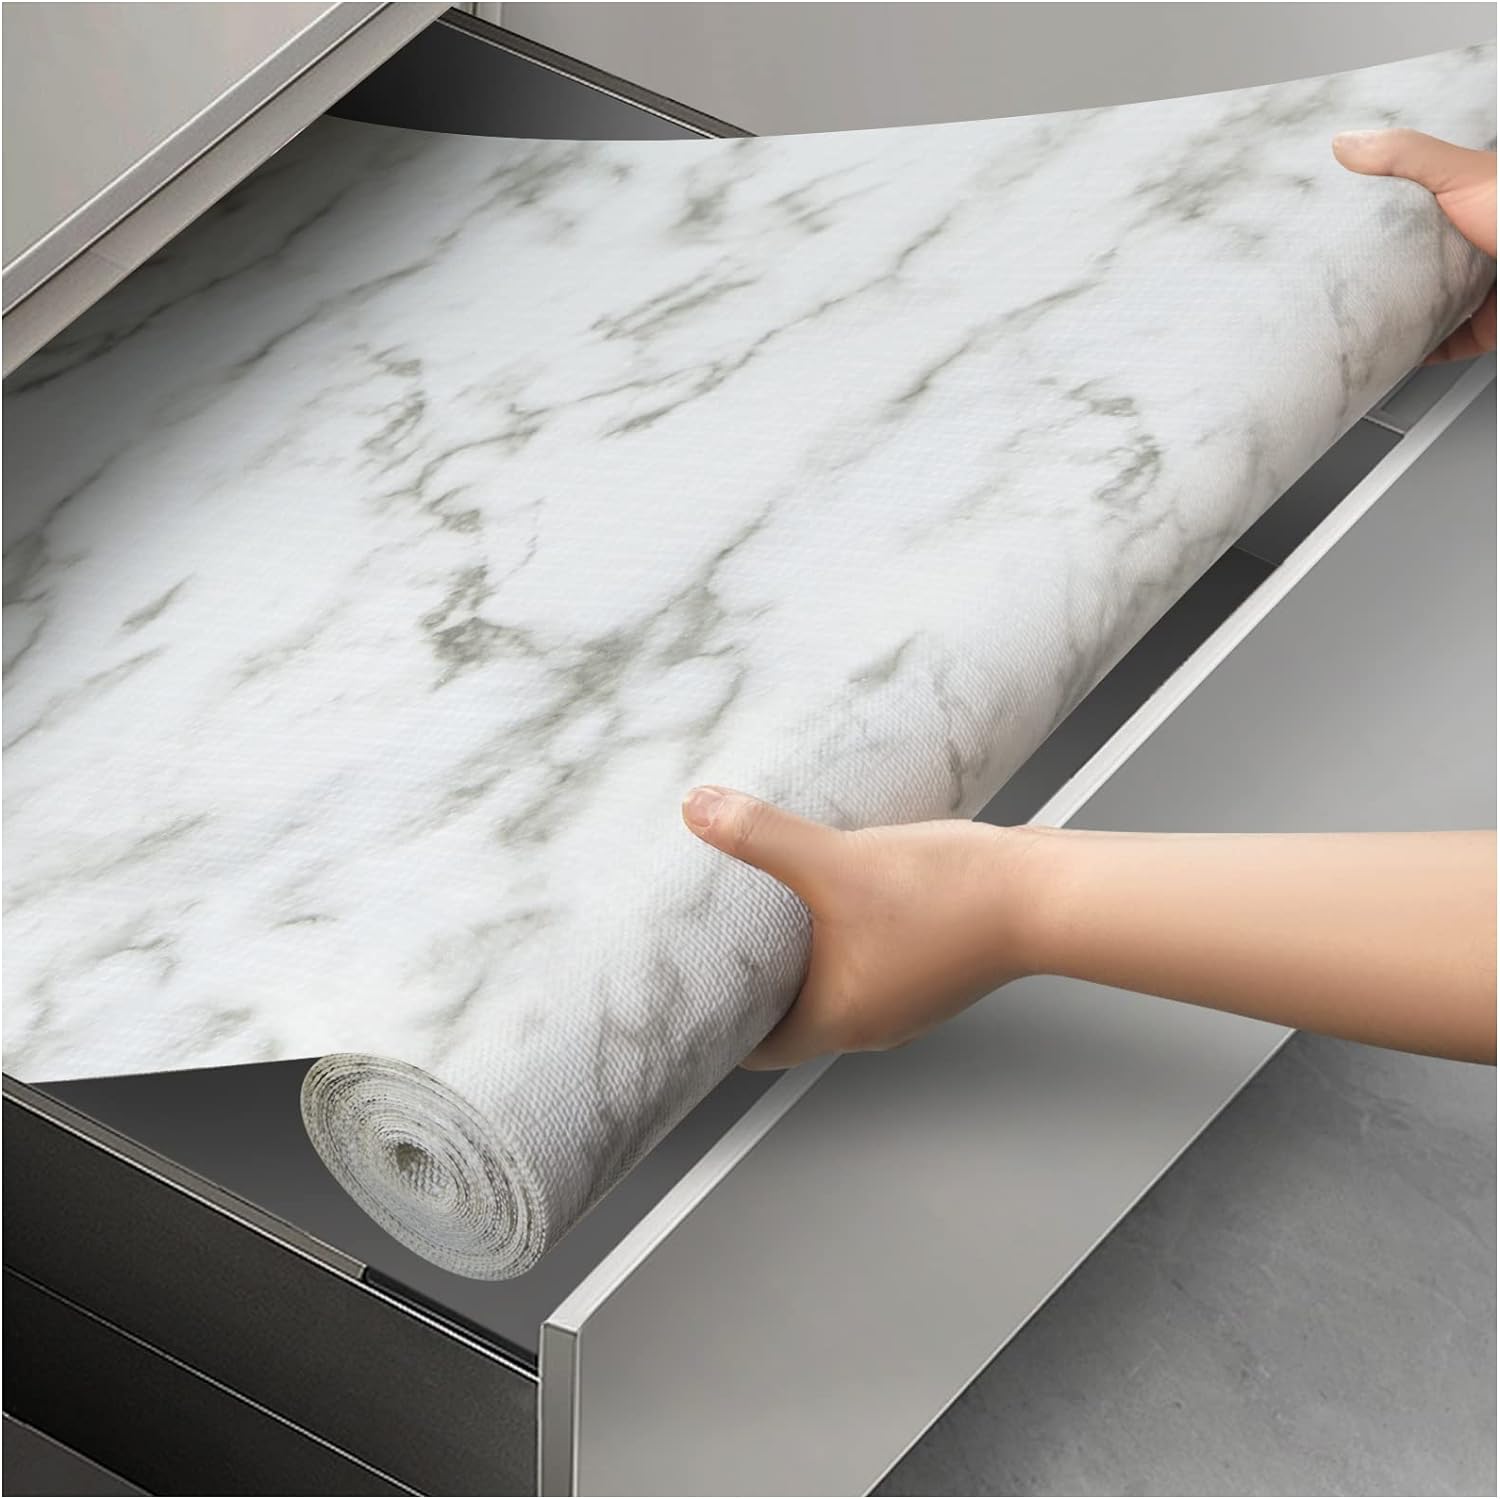 Anoak Shelf Liner Non Adhesive Cabinet Liner, 12 Inch x 10 FT(120 Inch)  Drawer Liners Washable Durable Refrigerator Liner Drawer Mat for Cupboard